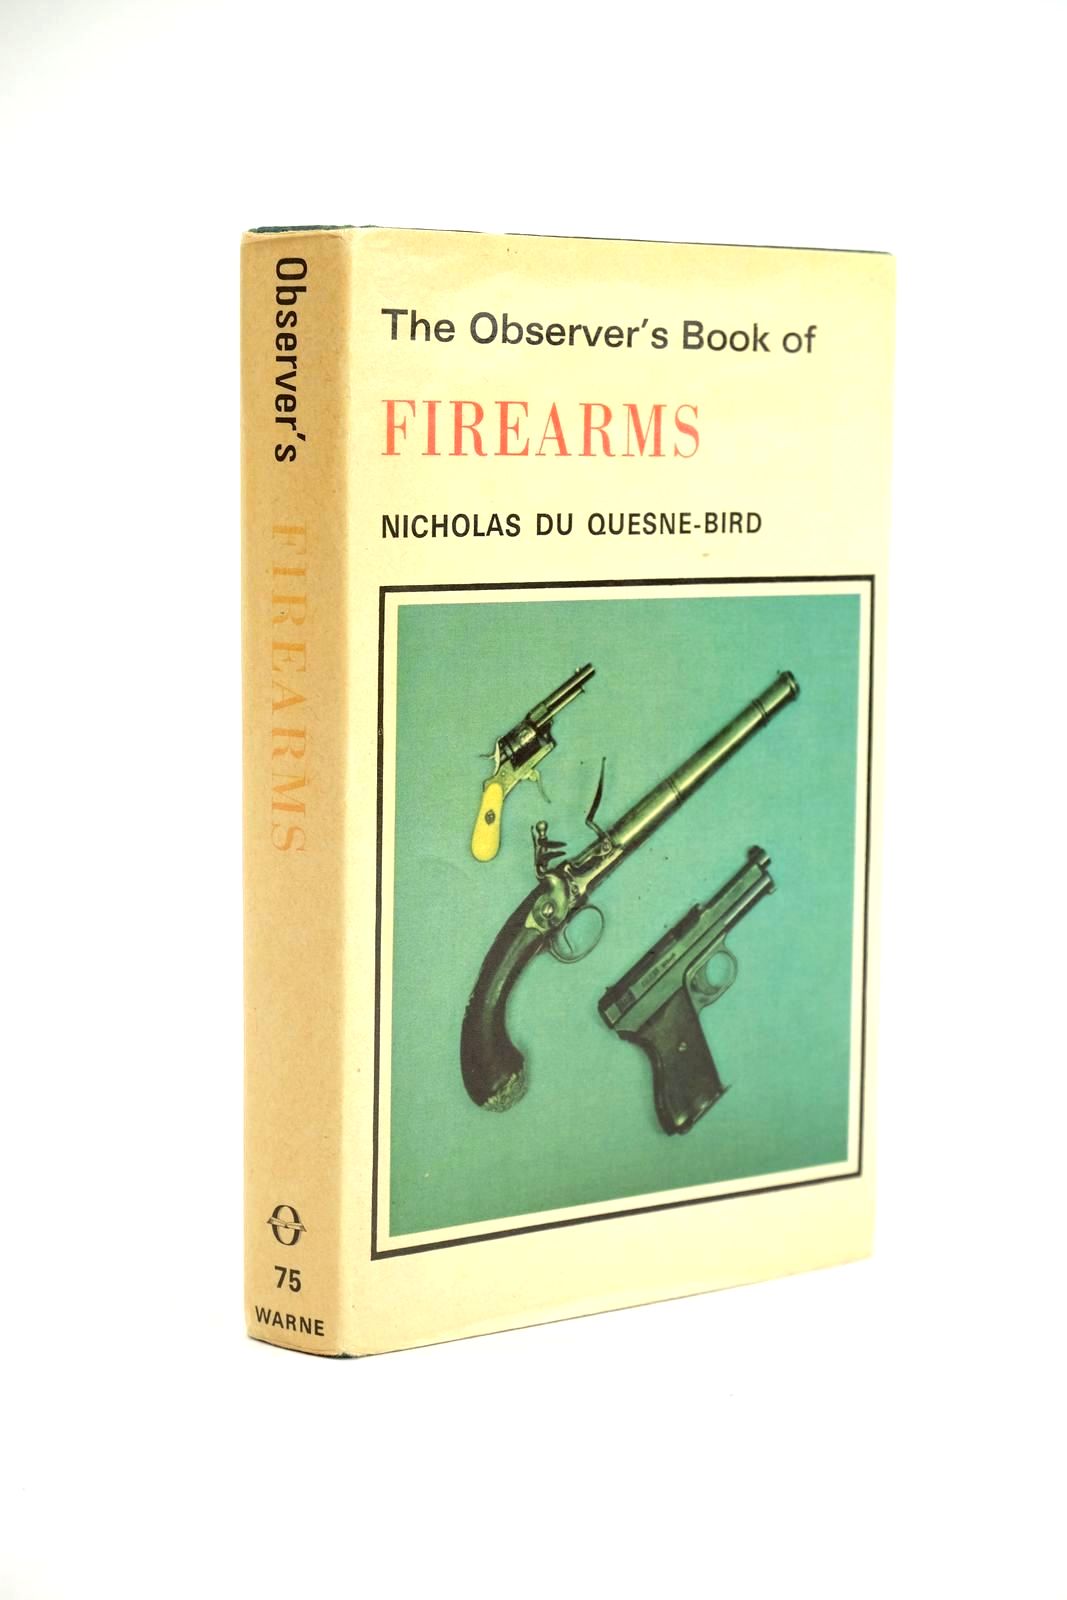 Photo of THE OBSERVER'S BOOK OF FIREARMS written by Du Quesne-Bird, Nicholas published by Frederick Warne (Publishers) Ltd. (STOCK CODE: 1323445)  for sale by Stella & Rose's Books